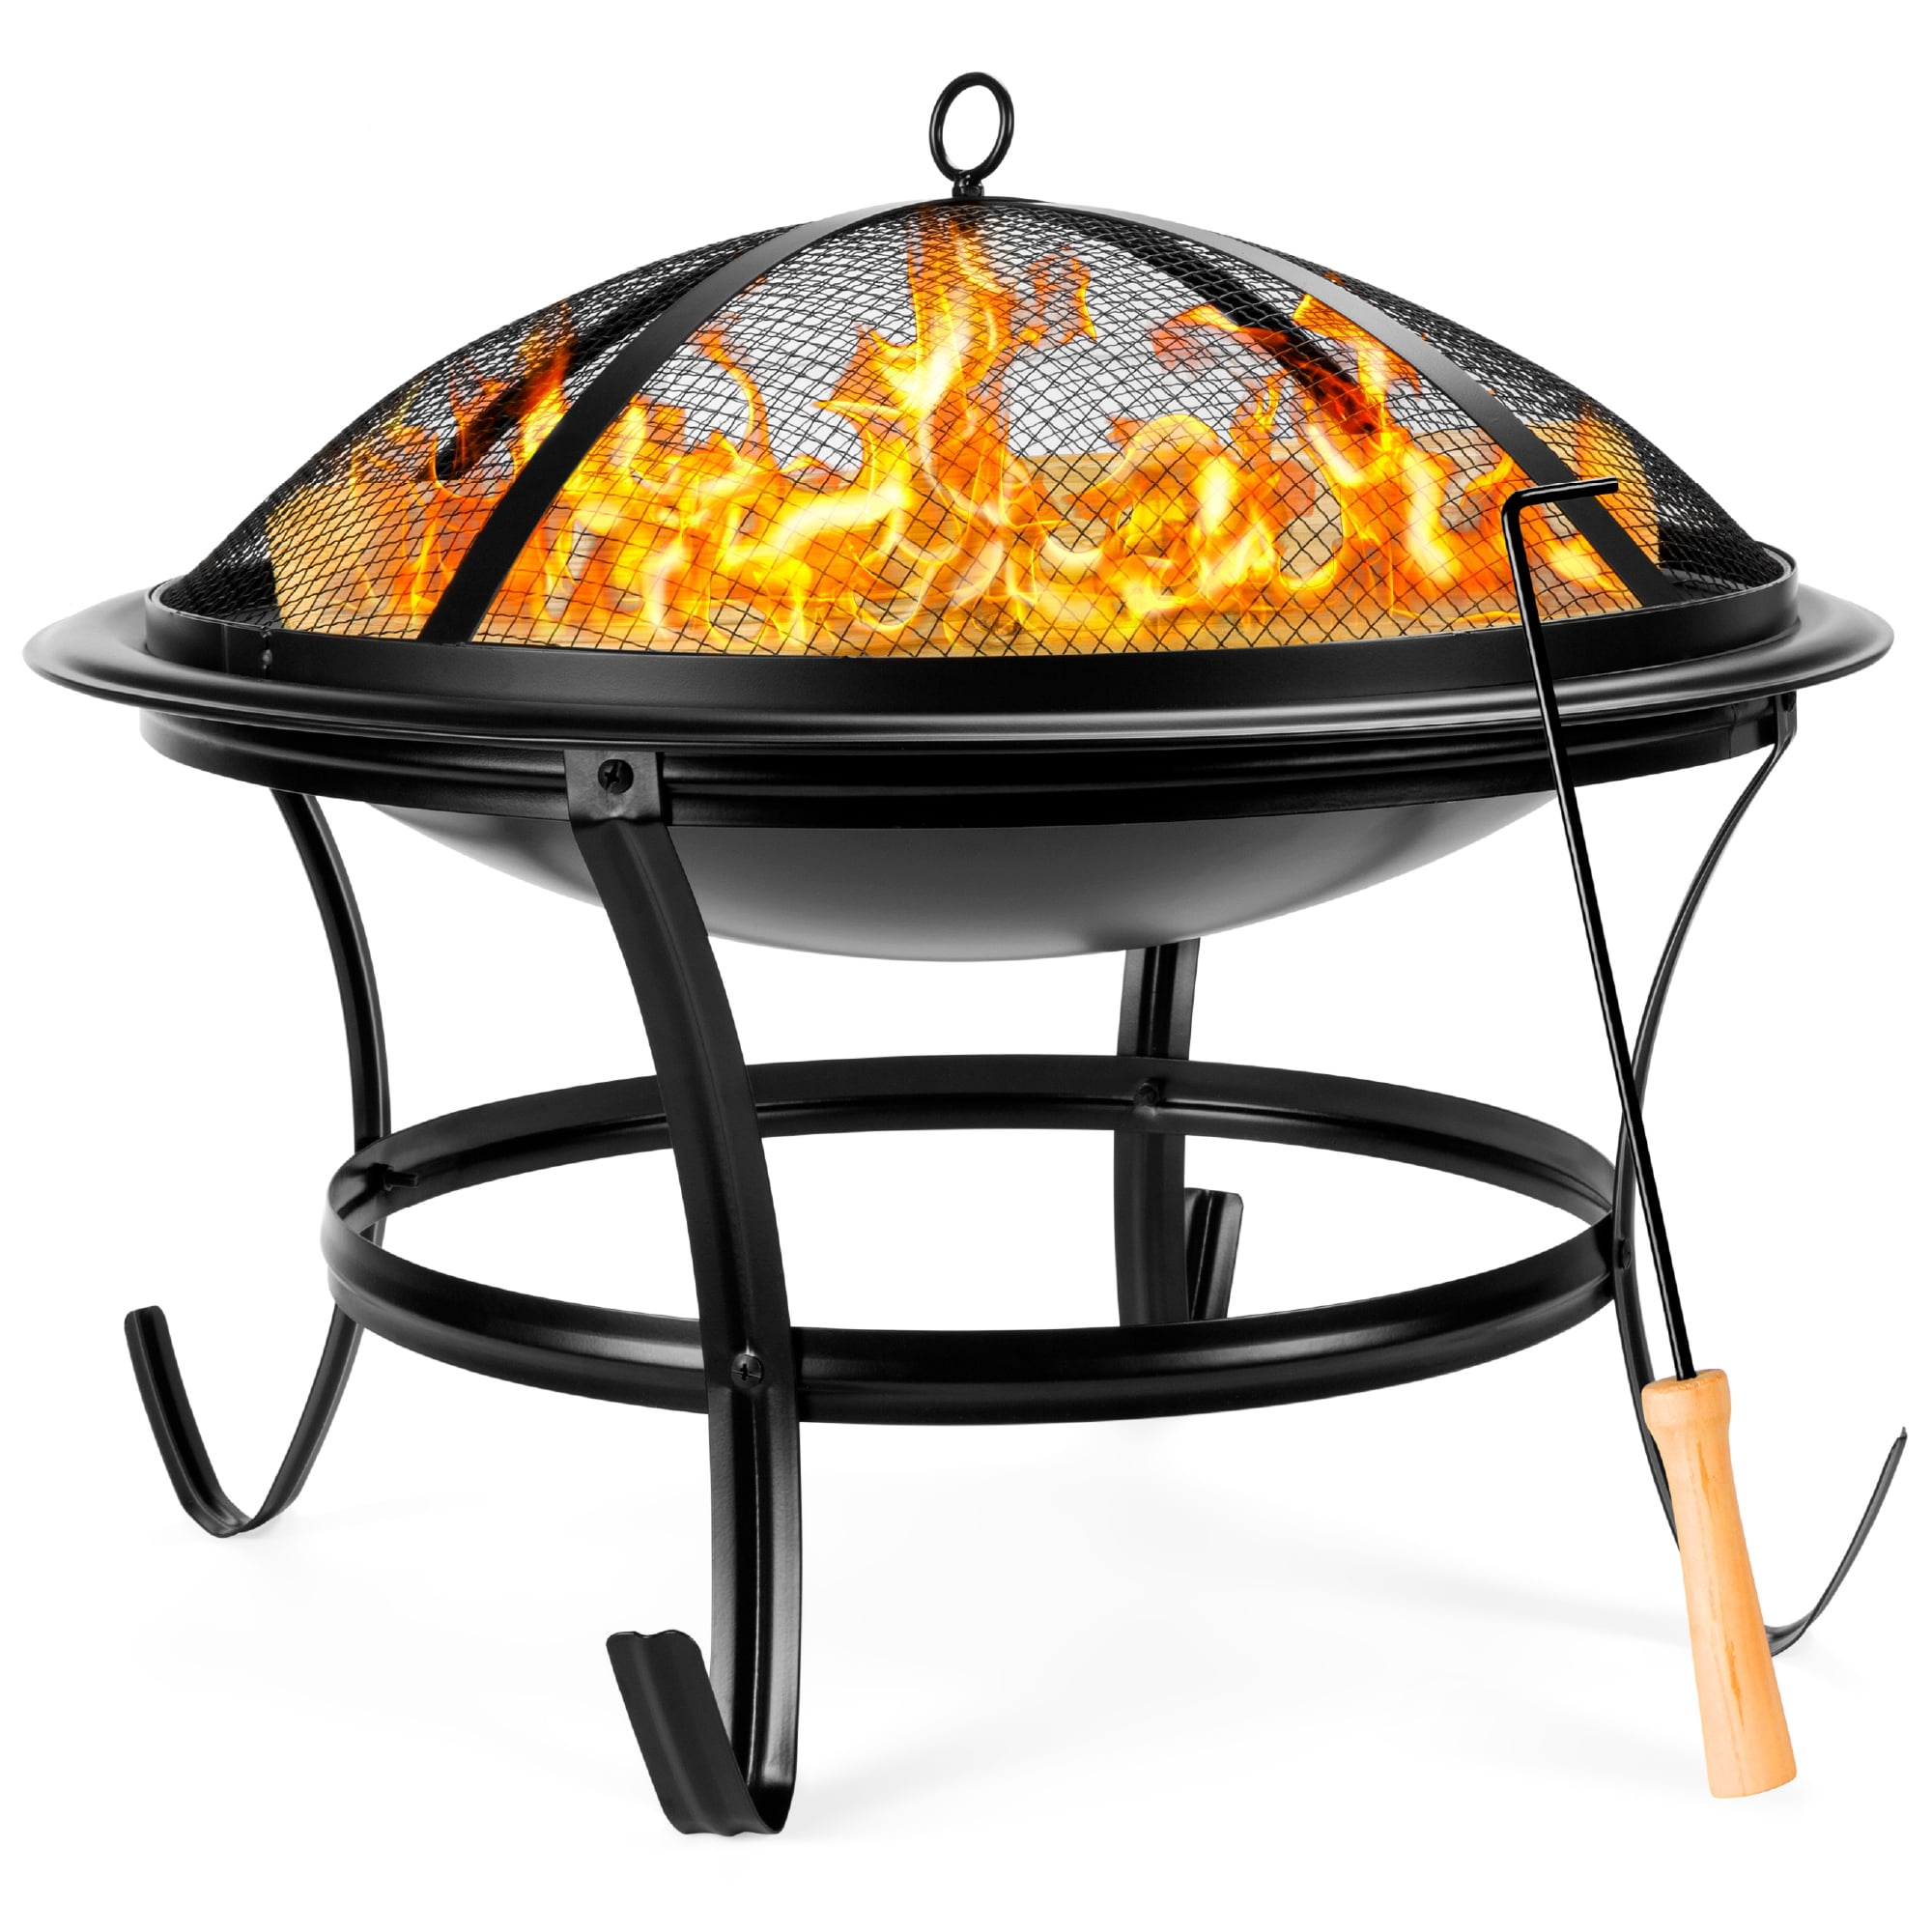 Geepro Fire Pit For Garden,Portable Firepit For Camping With BBQ Grill & Fire Poker & Mesh Lid,Iron Outdoor Travel Heaters,Log & Wood Burner,Fire Bowl For Patio,Barbecue Brazier